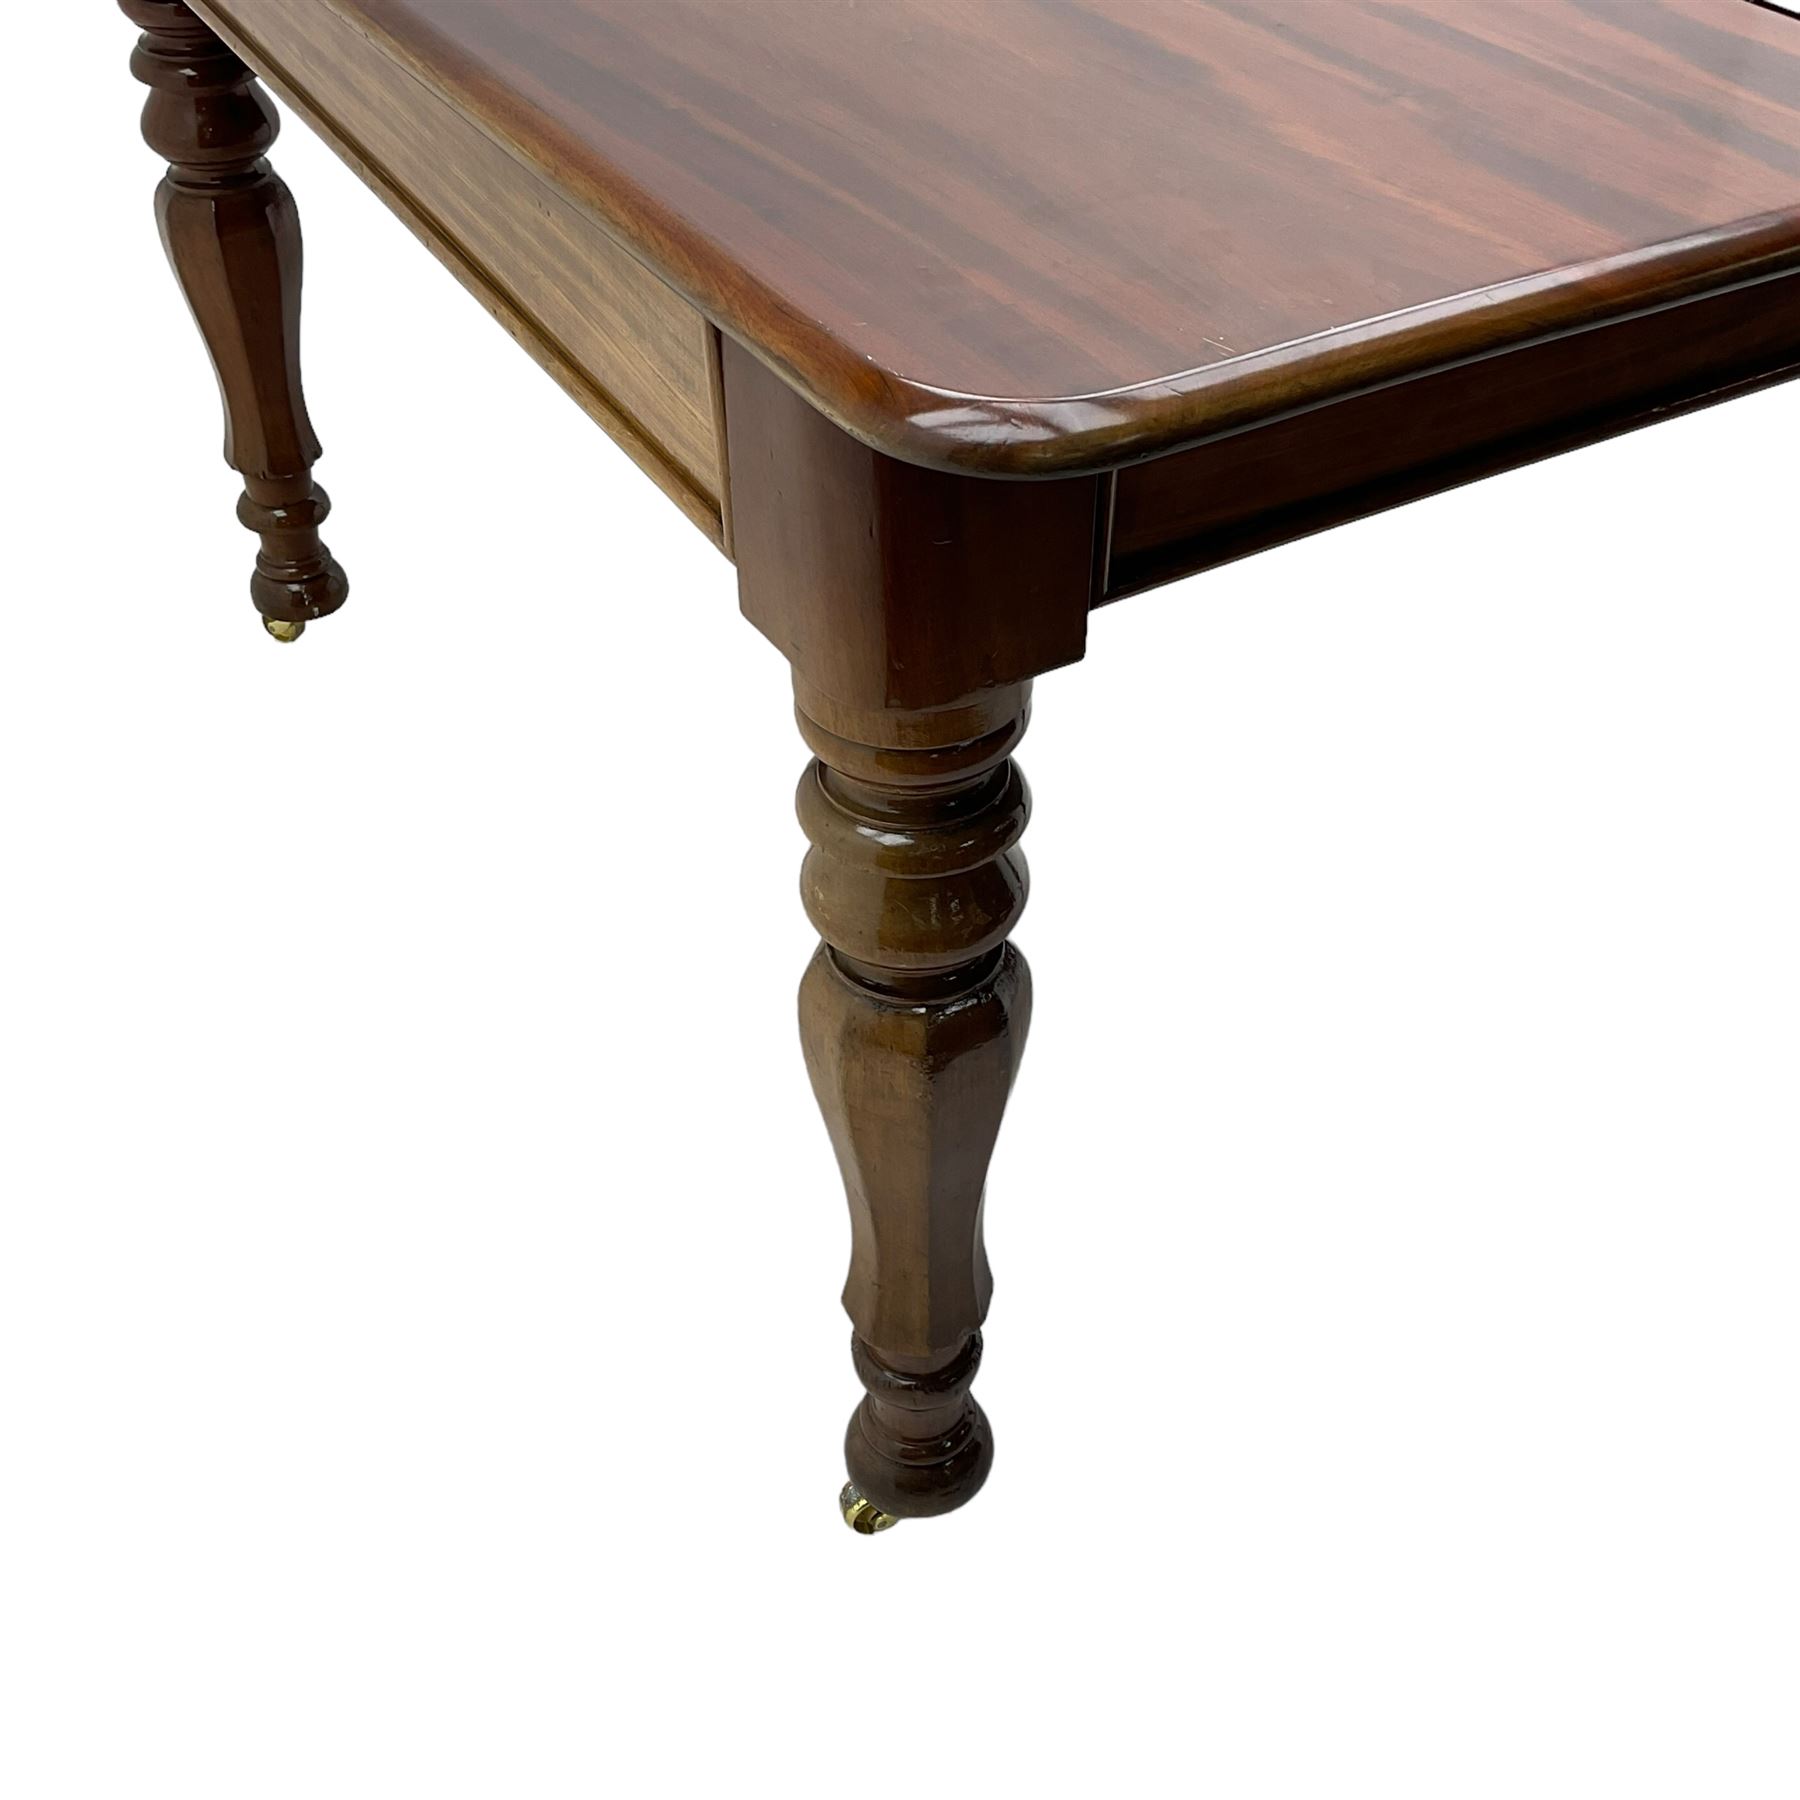 19th century mahogany extending dining table with three additional leaves - Image 10 of 15